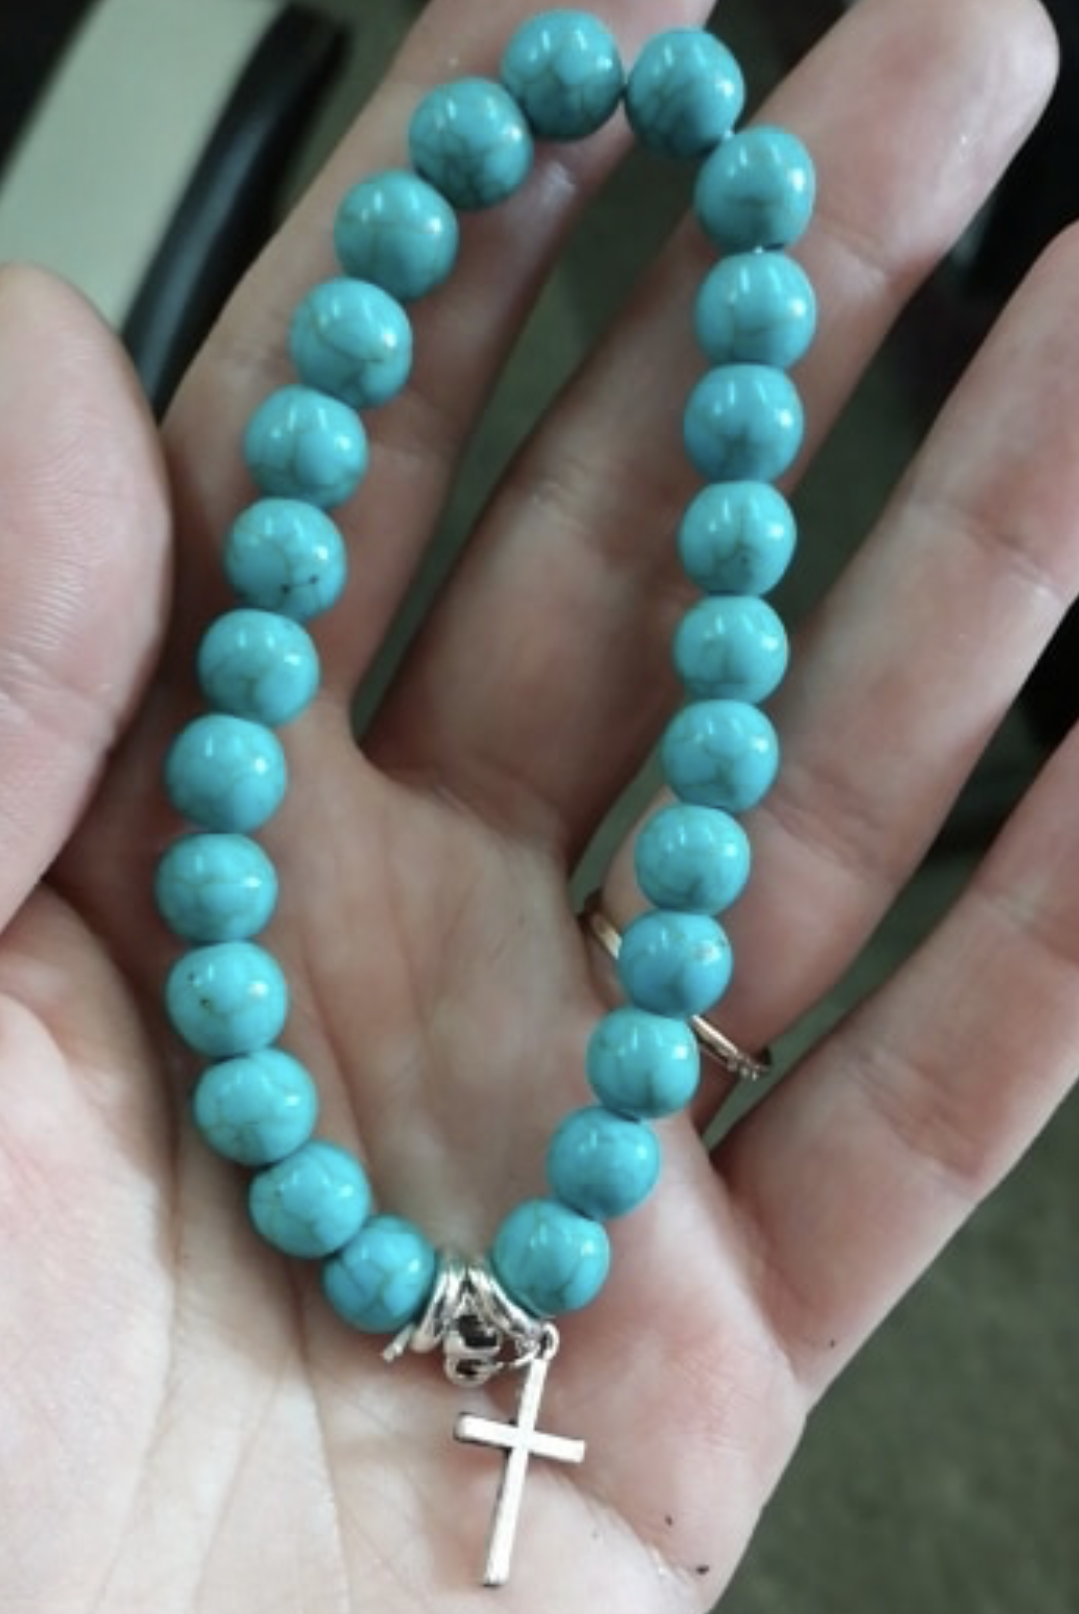 Handmade Turquoise Bracelet with “Cross” Charm - coleculture